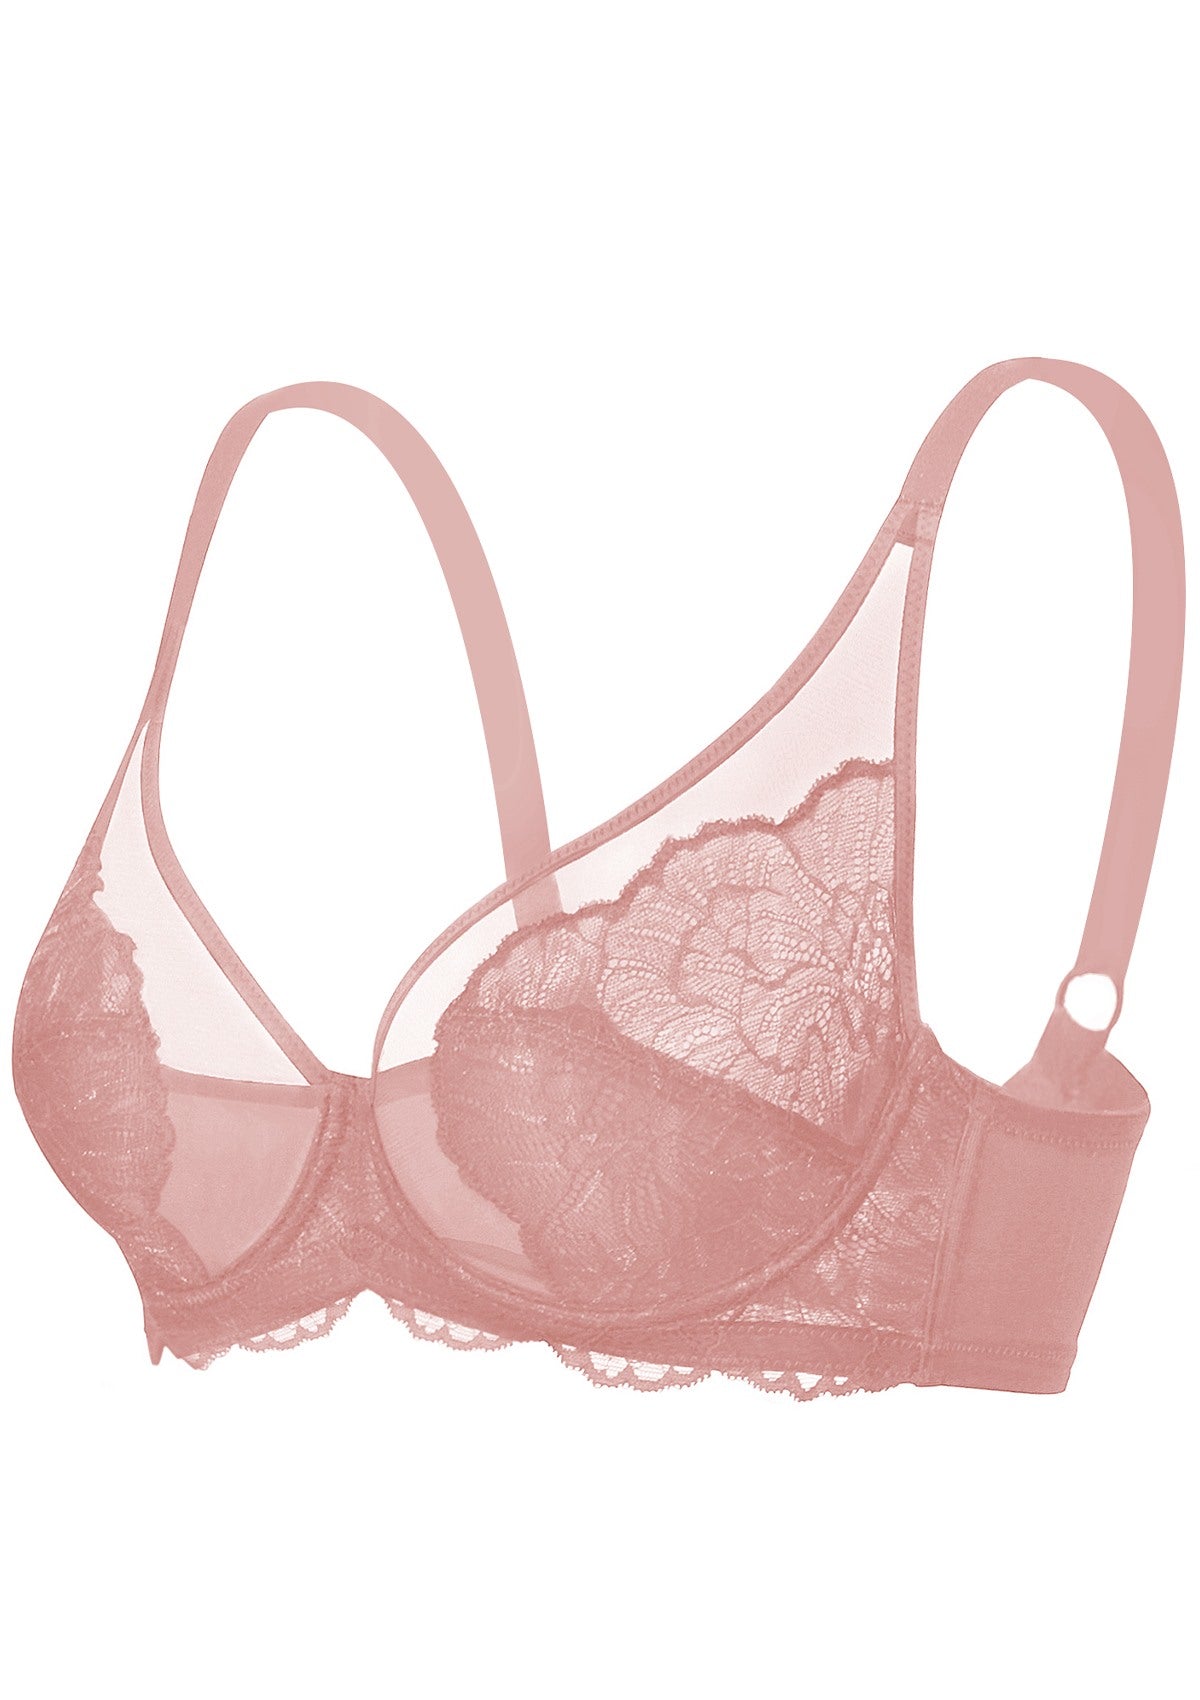 HSIA Blossom Unlined Lace Underwire Bra - Burgundy / 34 / D